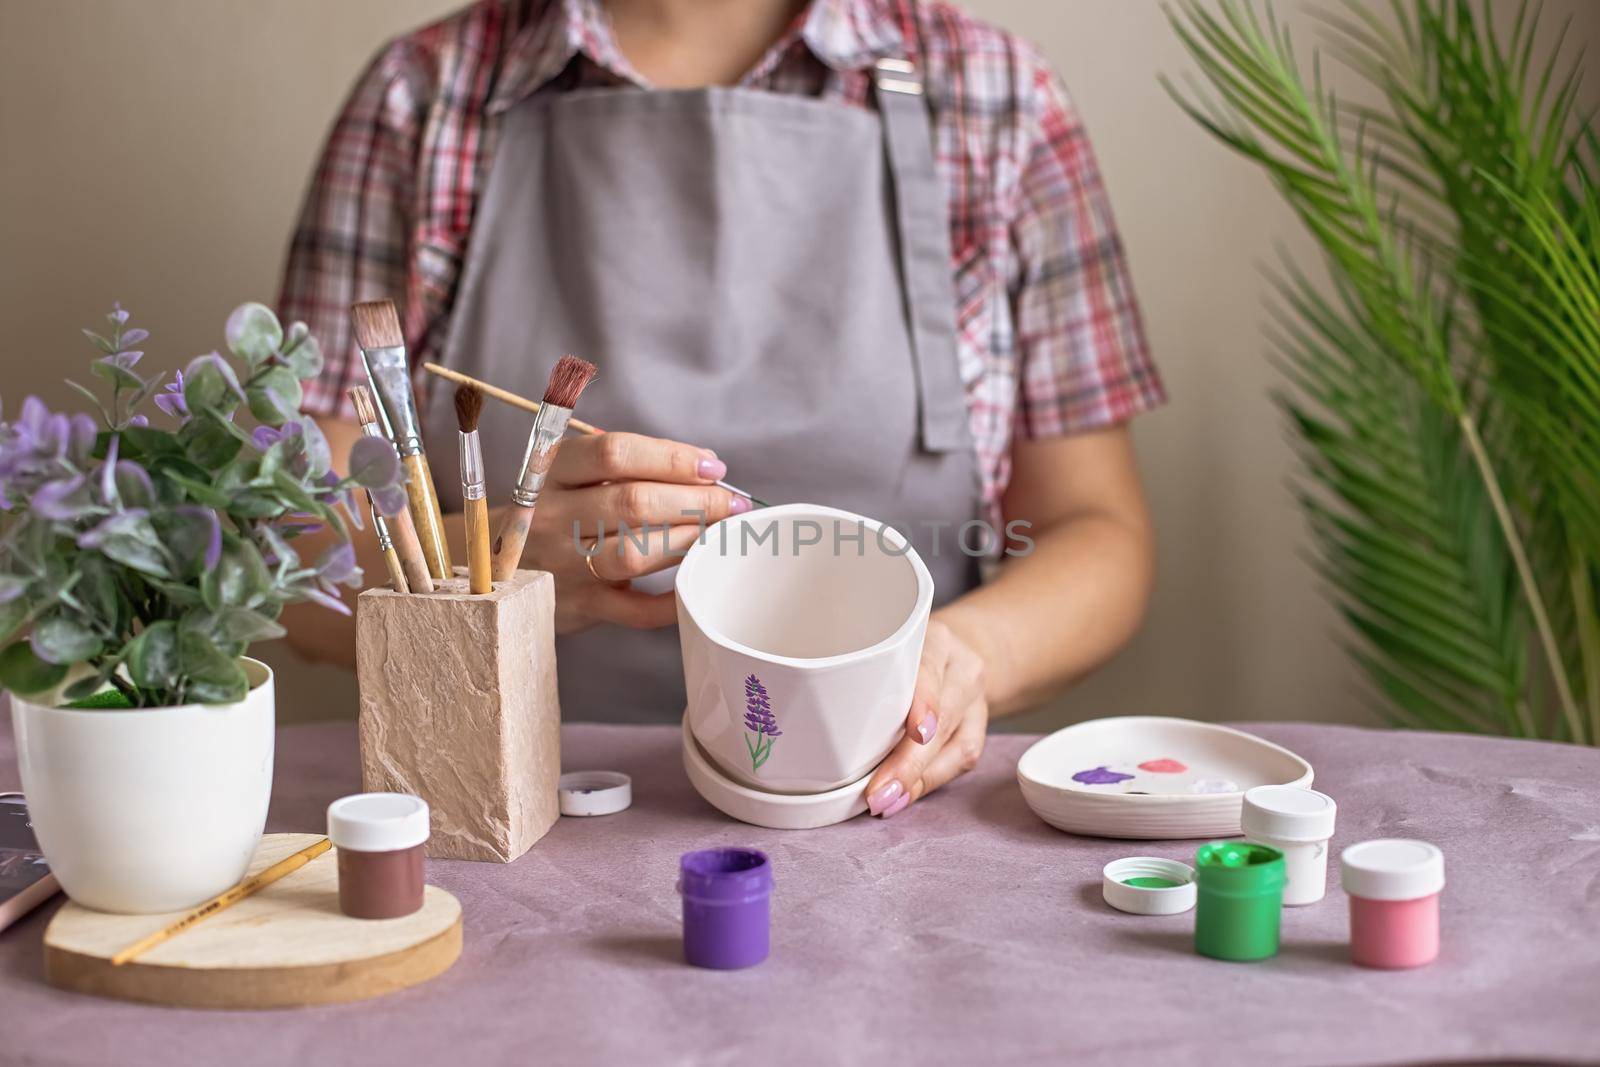 A woman in a gray apron and a plaid shirt, sits at a table, paints a white ceramic flower pot, in daylight. On the table is purple kraft paper, brushes, jars of paints. No face